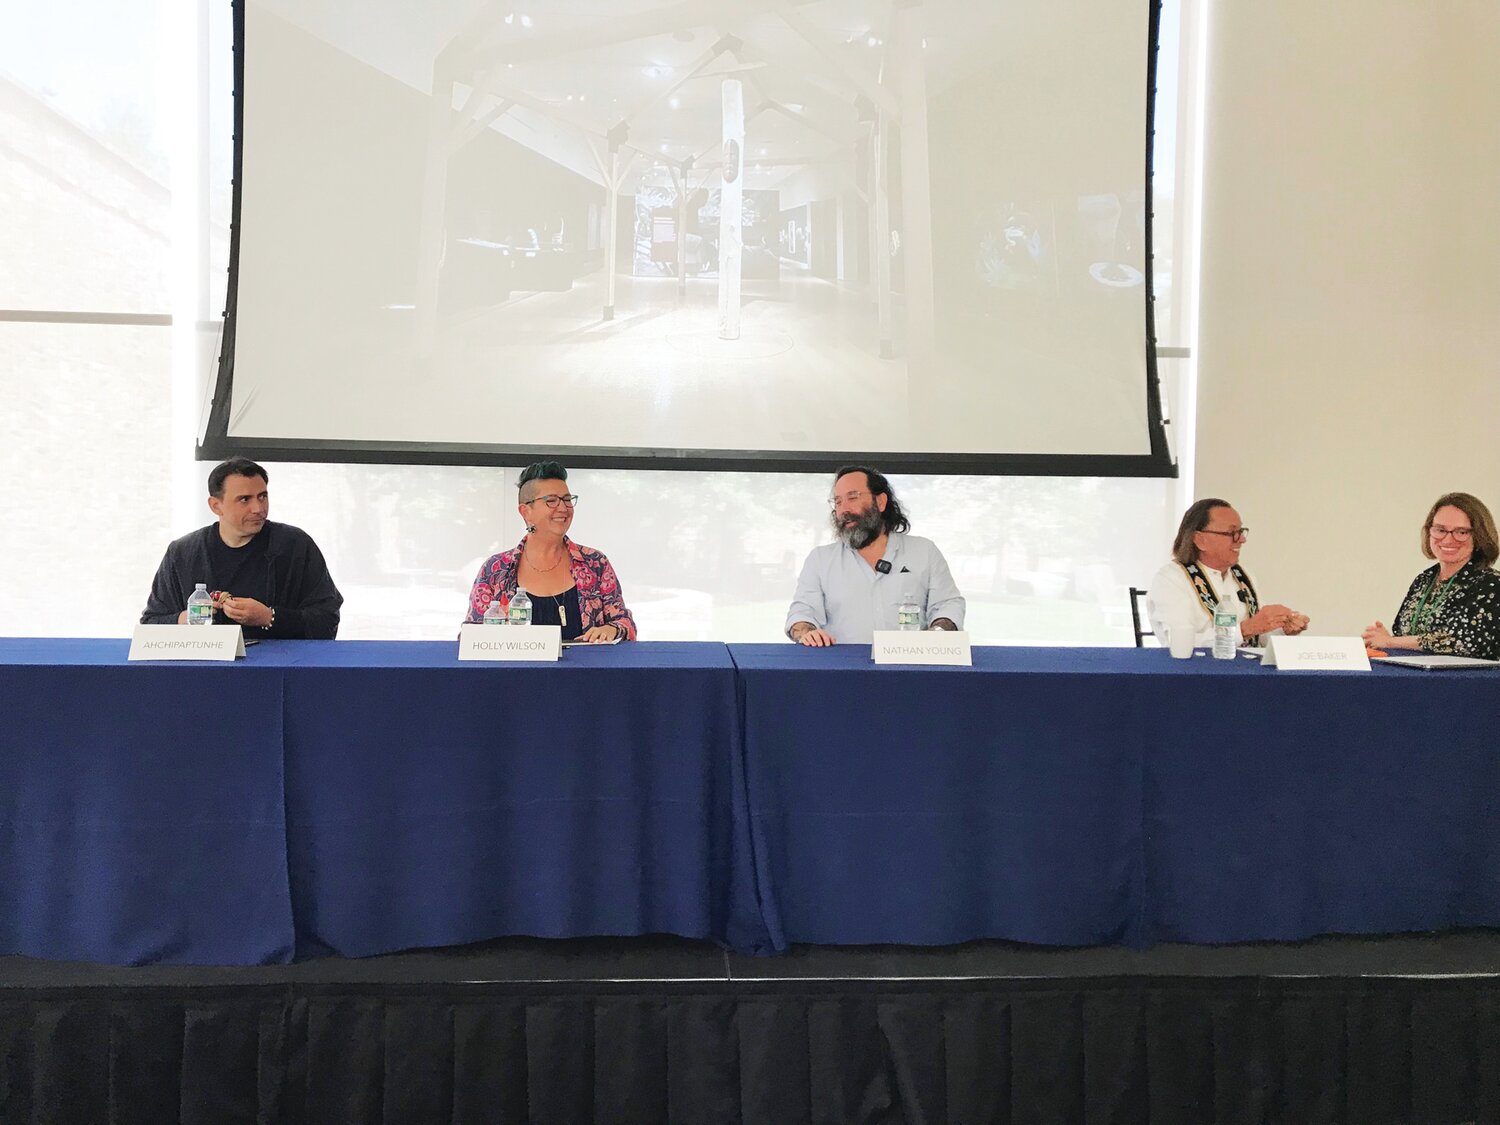 From left, during a panel discussion, are: Ahchipaptunhe, Holly Wilson, Nathan Young, Joe Baker and Laura Turner Igoe. On the screen above them is a photo of a potion of the “Never Broken” exhibition's Big House.